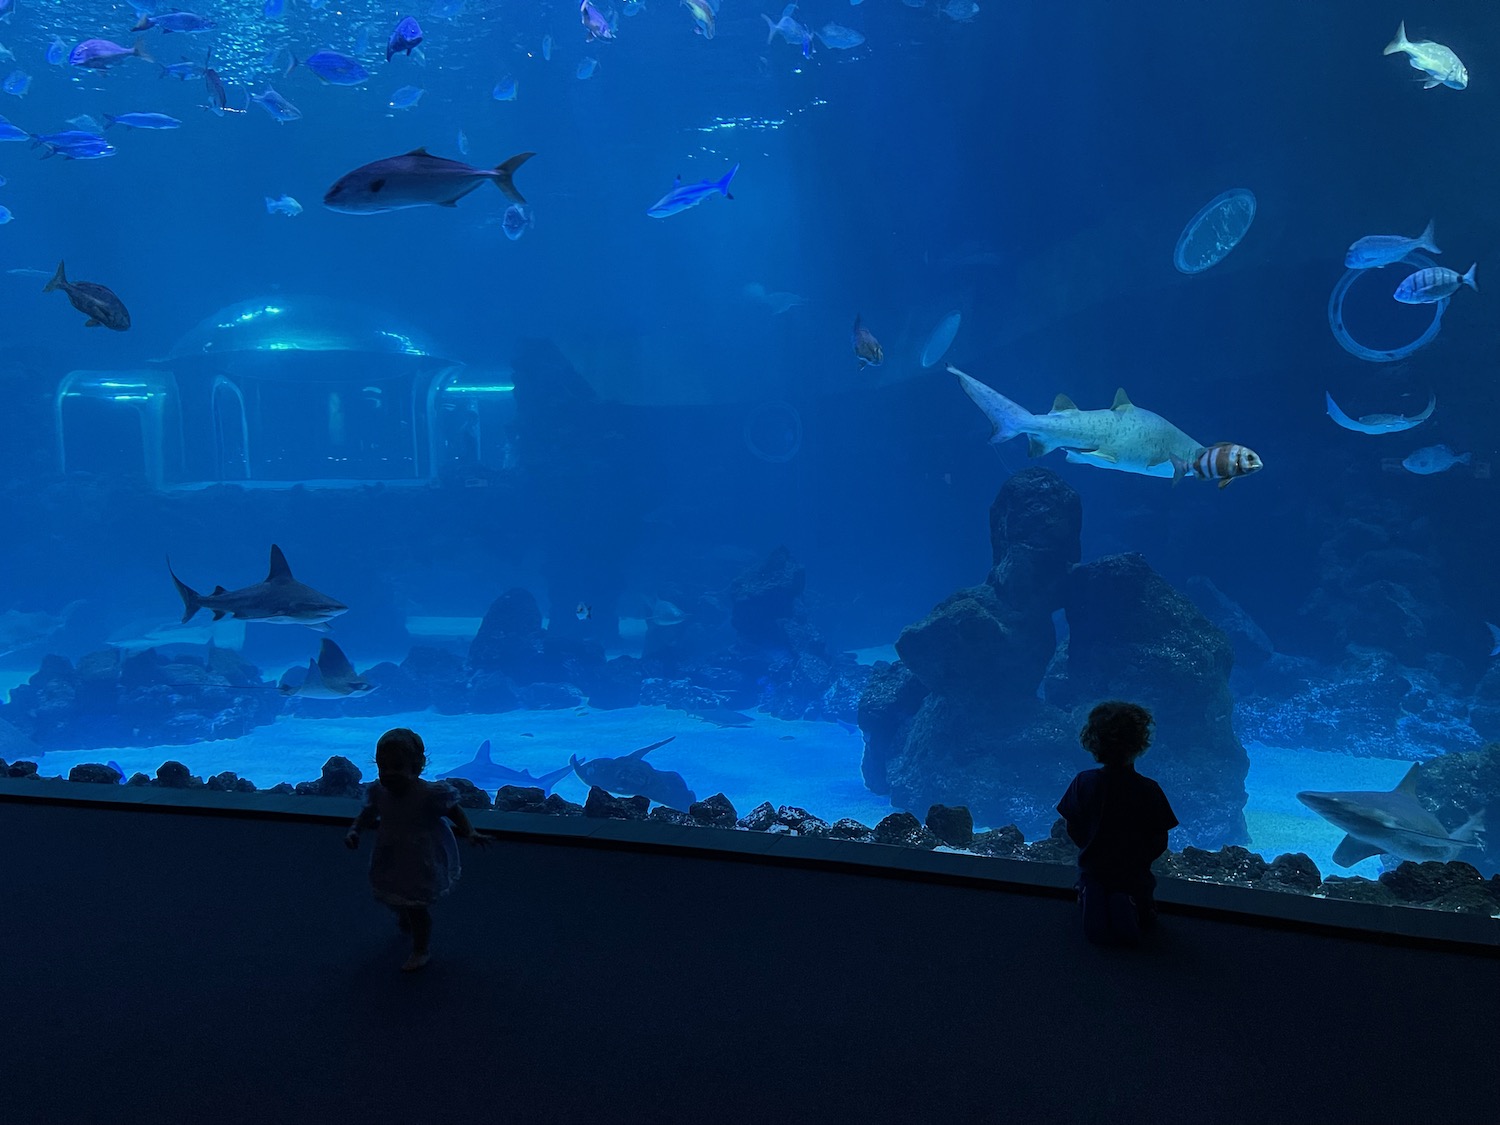 a child looking at fish in a tank